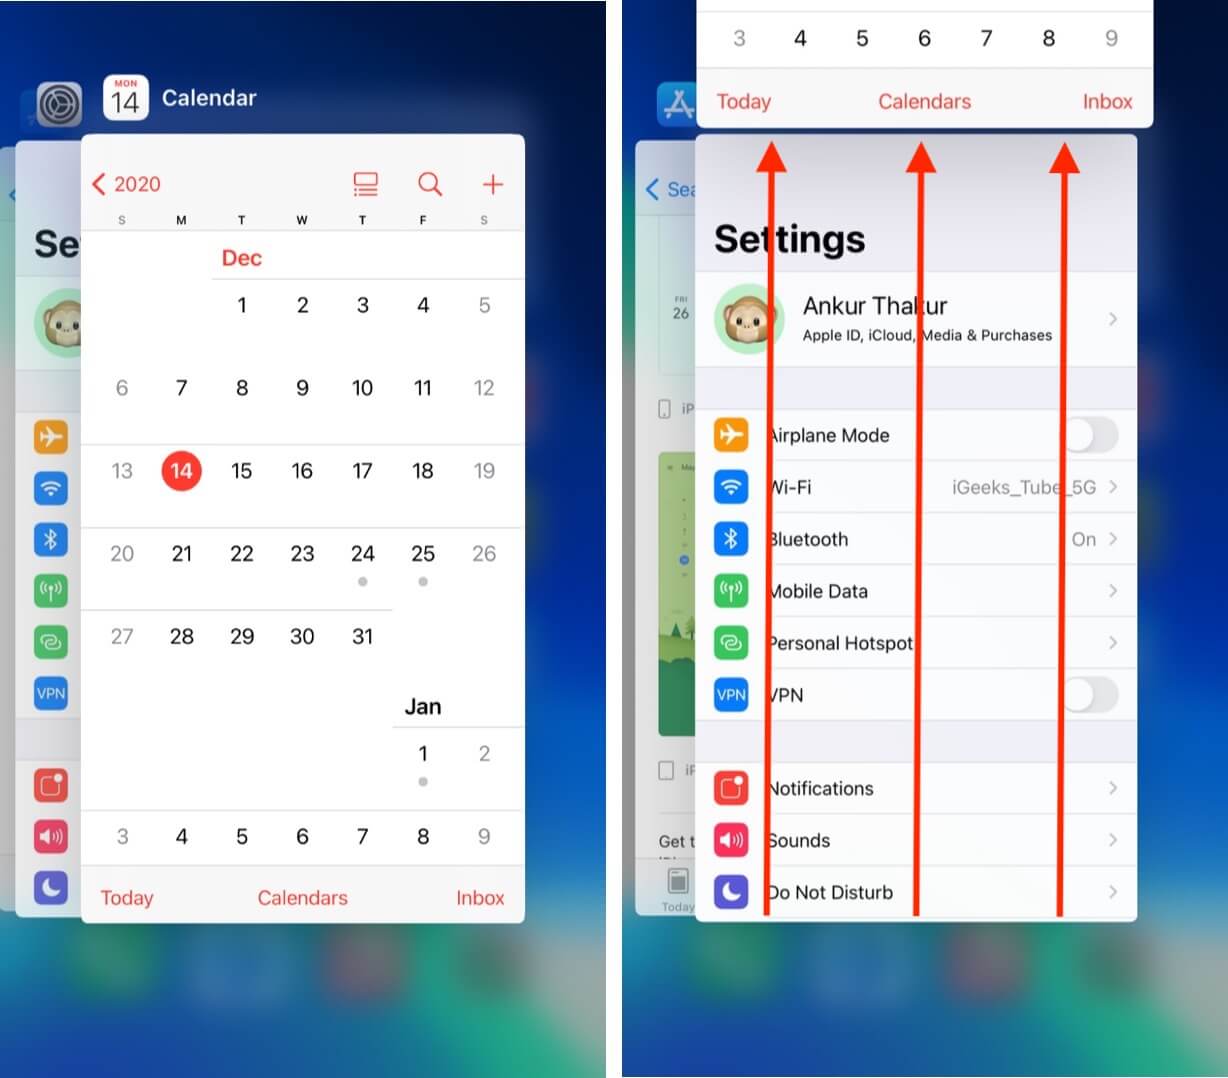 Force Quit Calendar App and Reopen